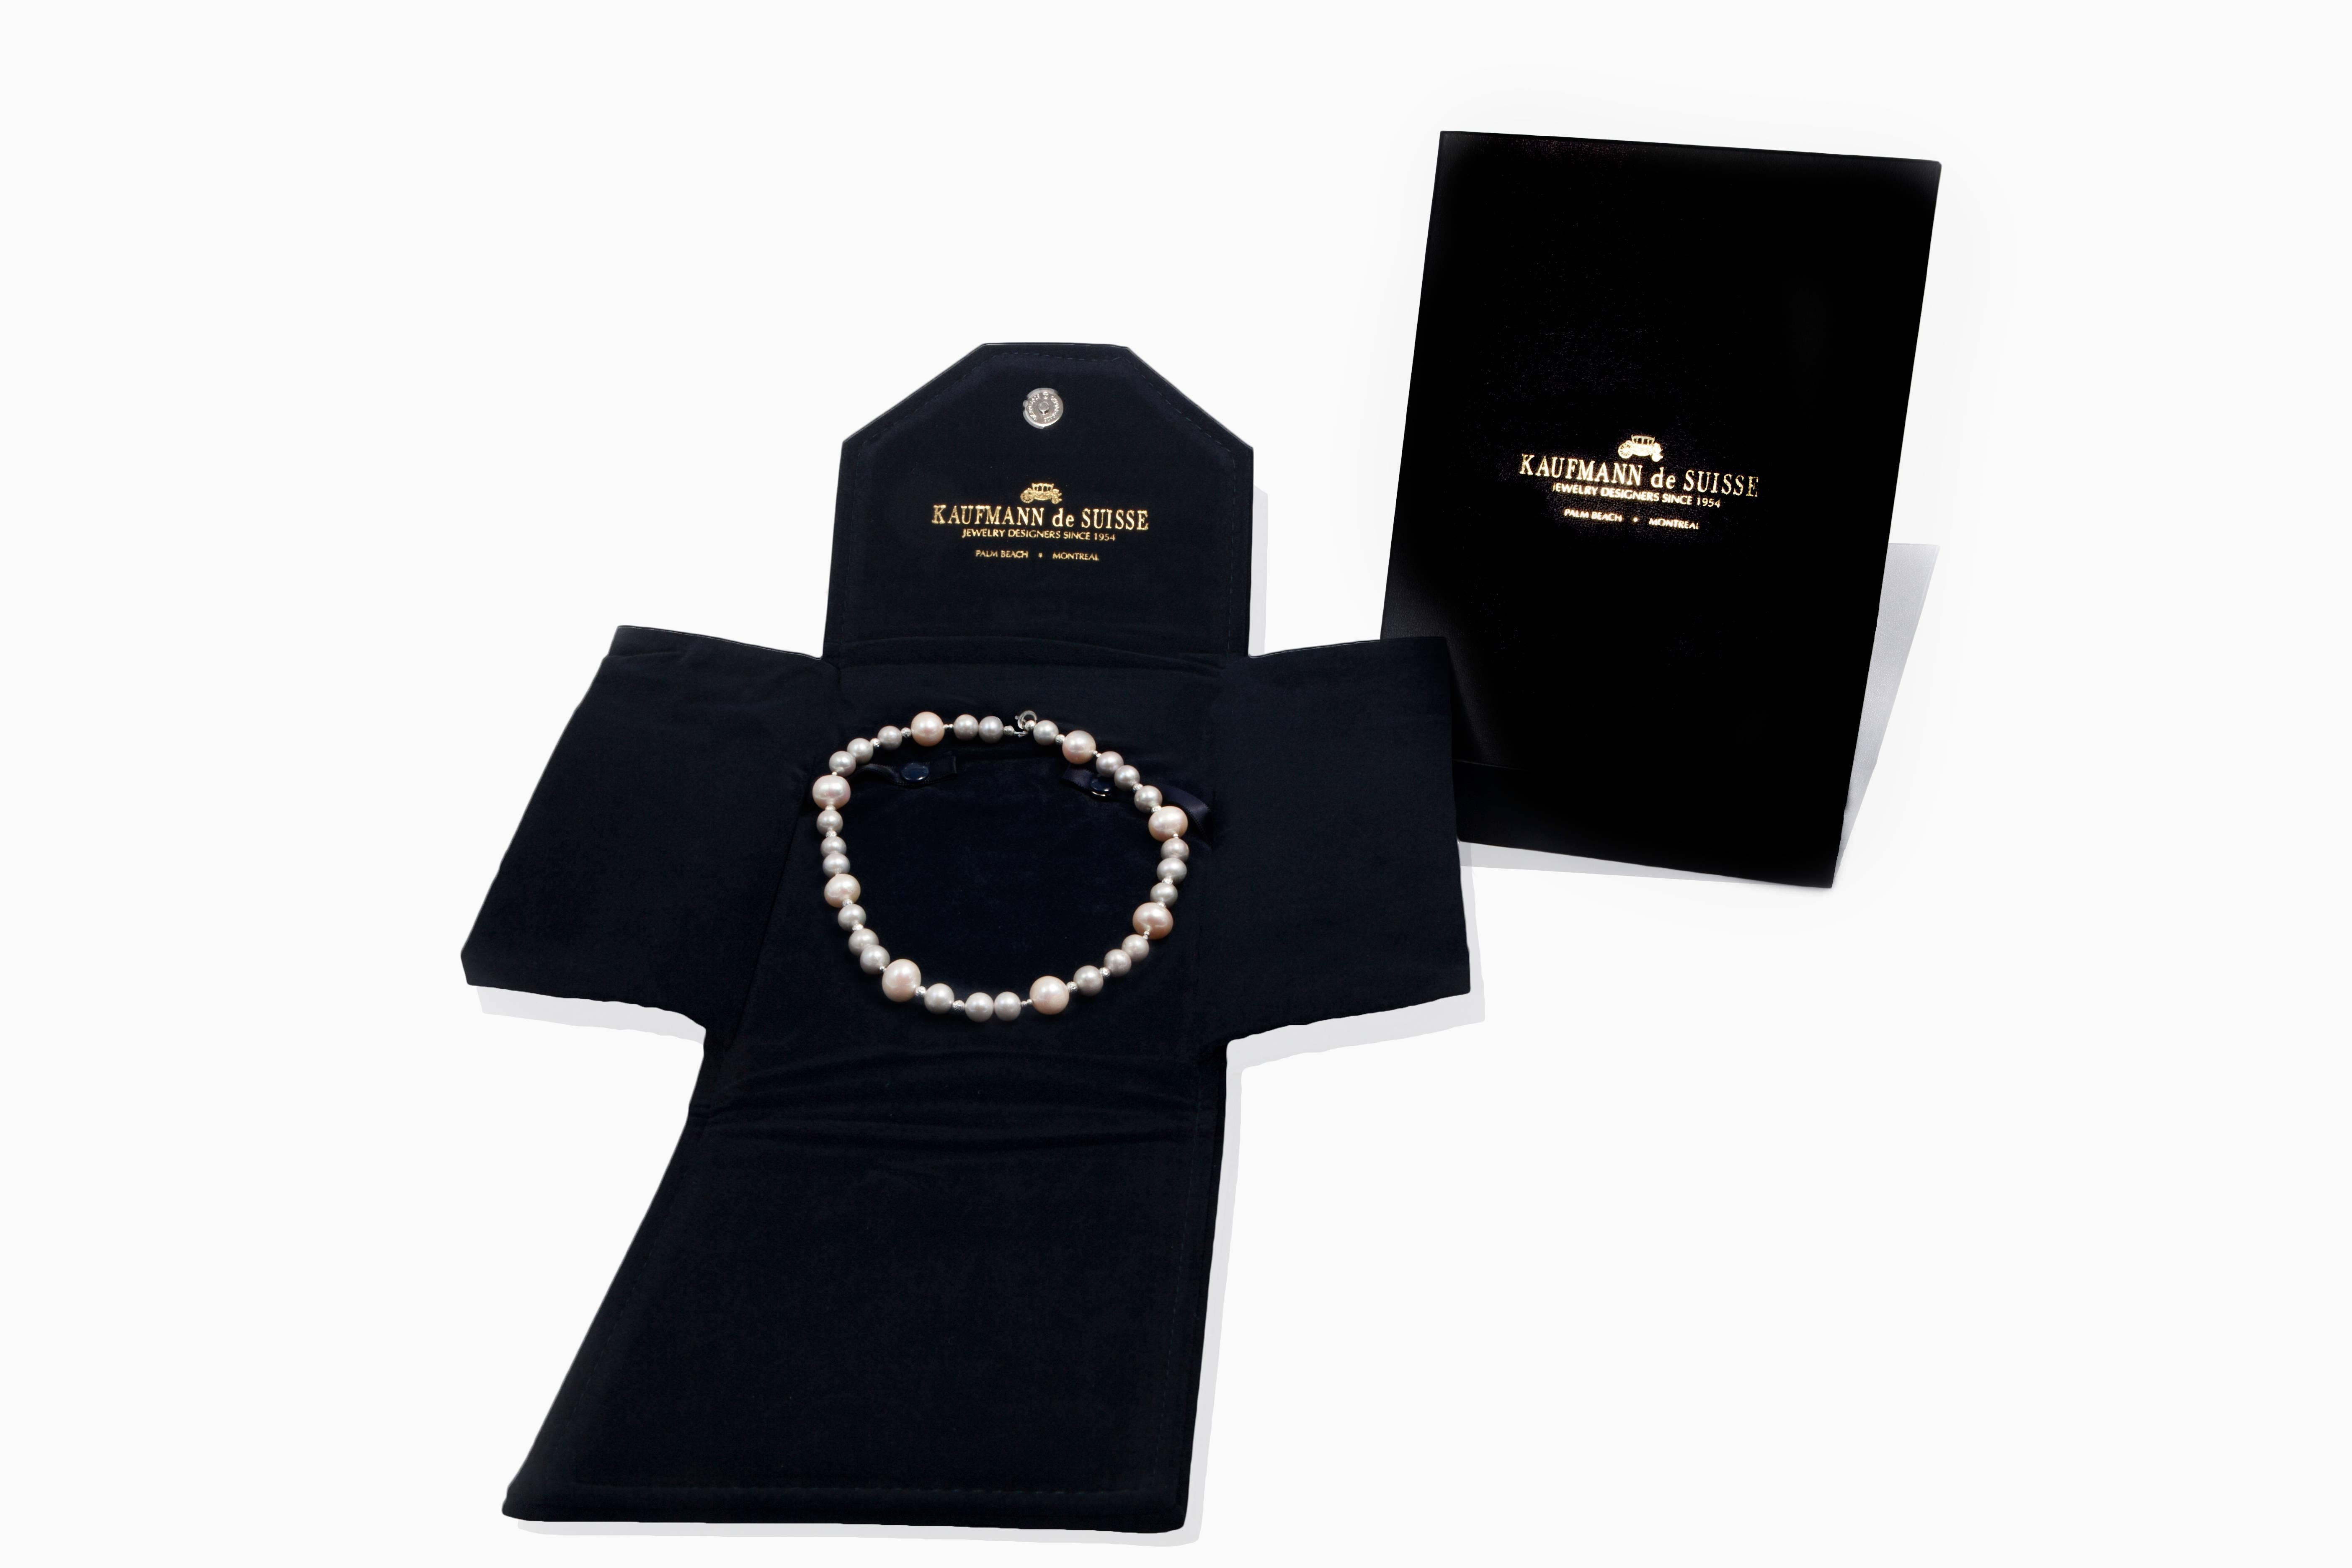 Features 24 Hand Picked Freshwater Grey Pearls Measuring 8-9mm Each and 8 White Pearls Measuring 12-13mm Each. Beautifully Spaced with Sterling Silver Diamond Cut Beads that sparkle just like diamonds. Original hand made in the USA design by